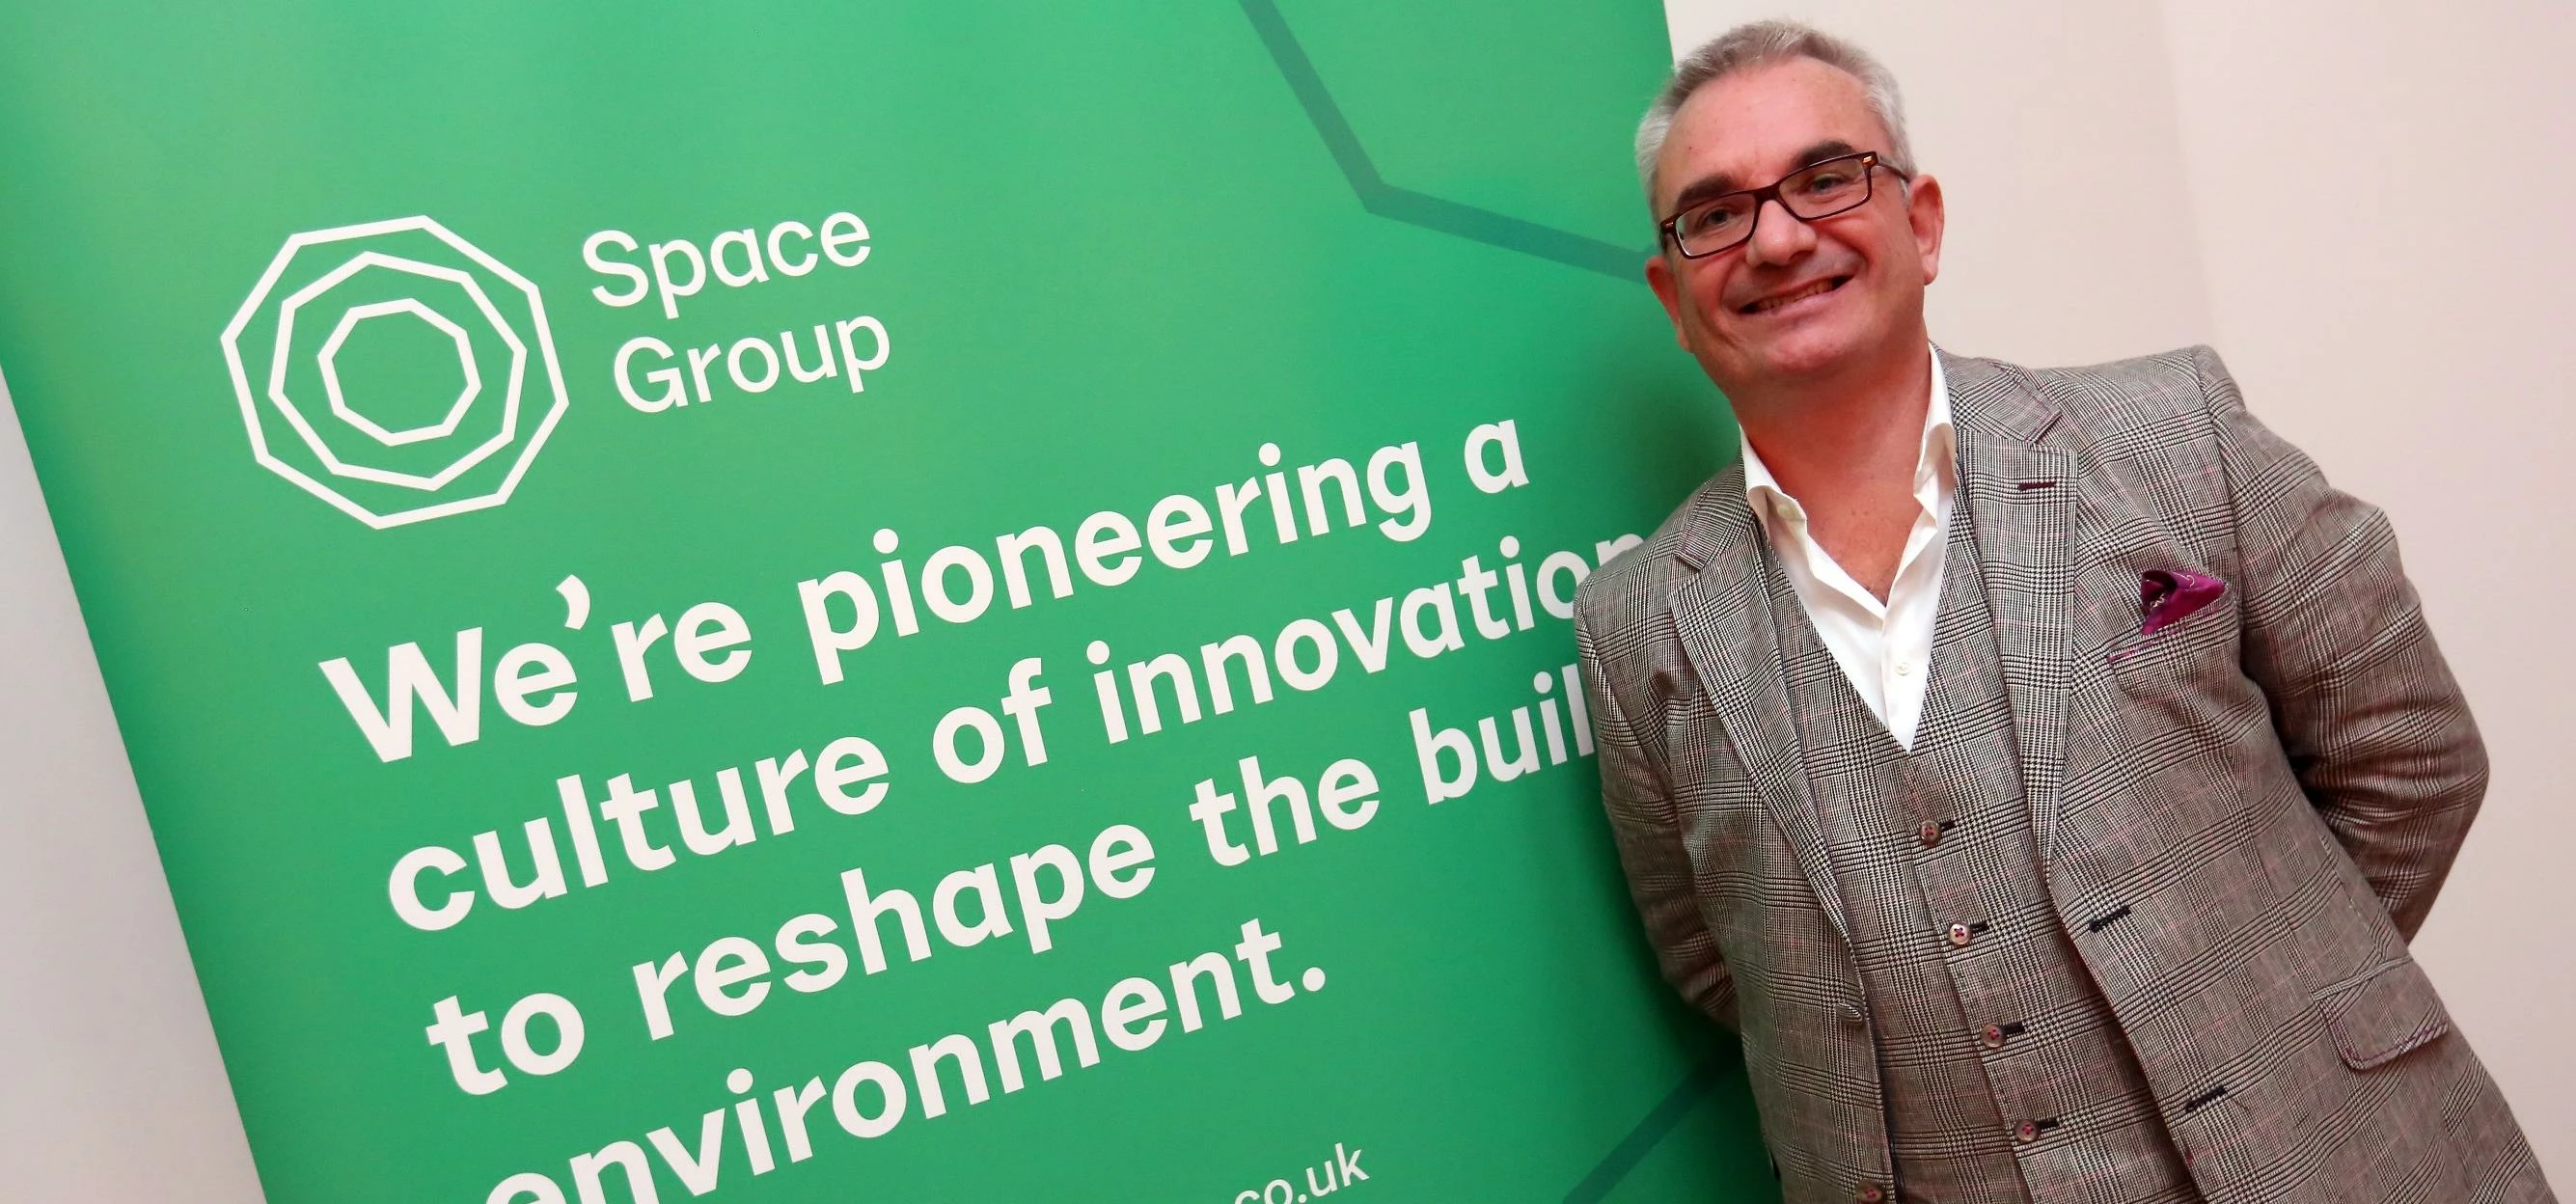 Rob Charlton, CEO of Space Group